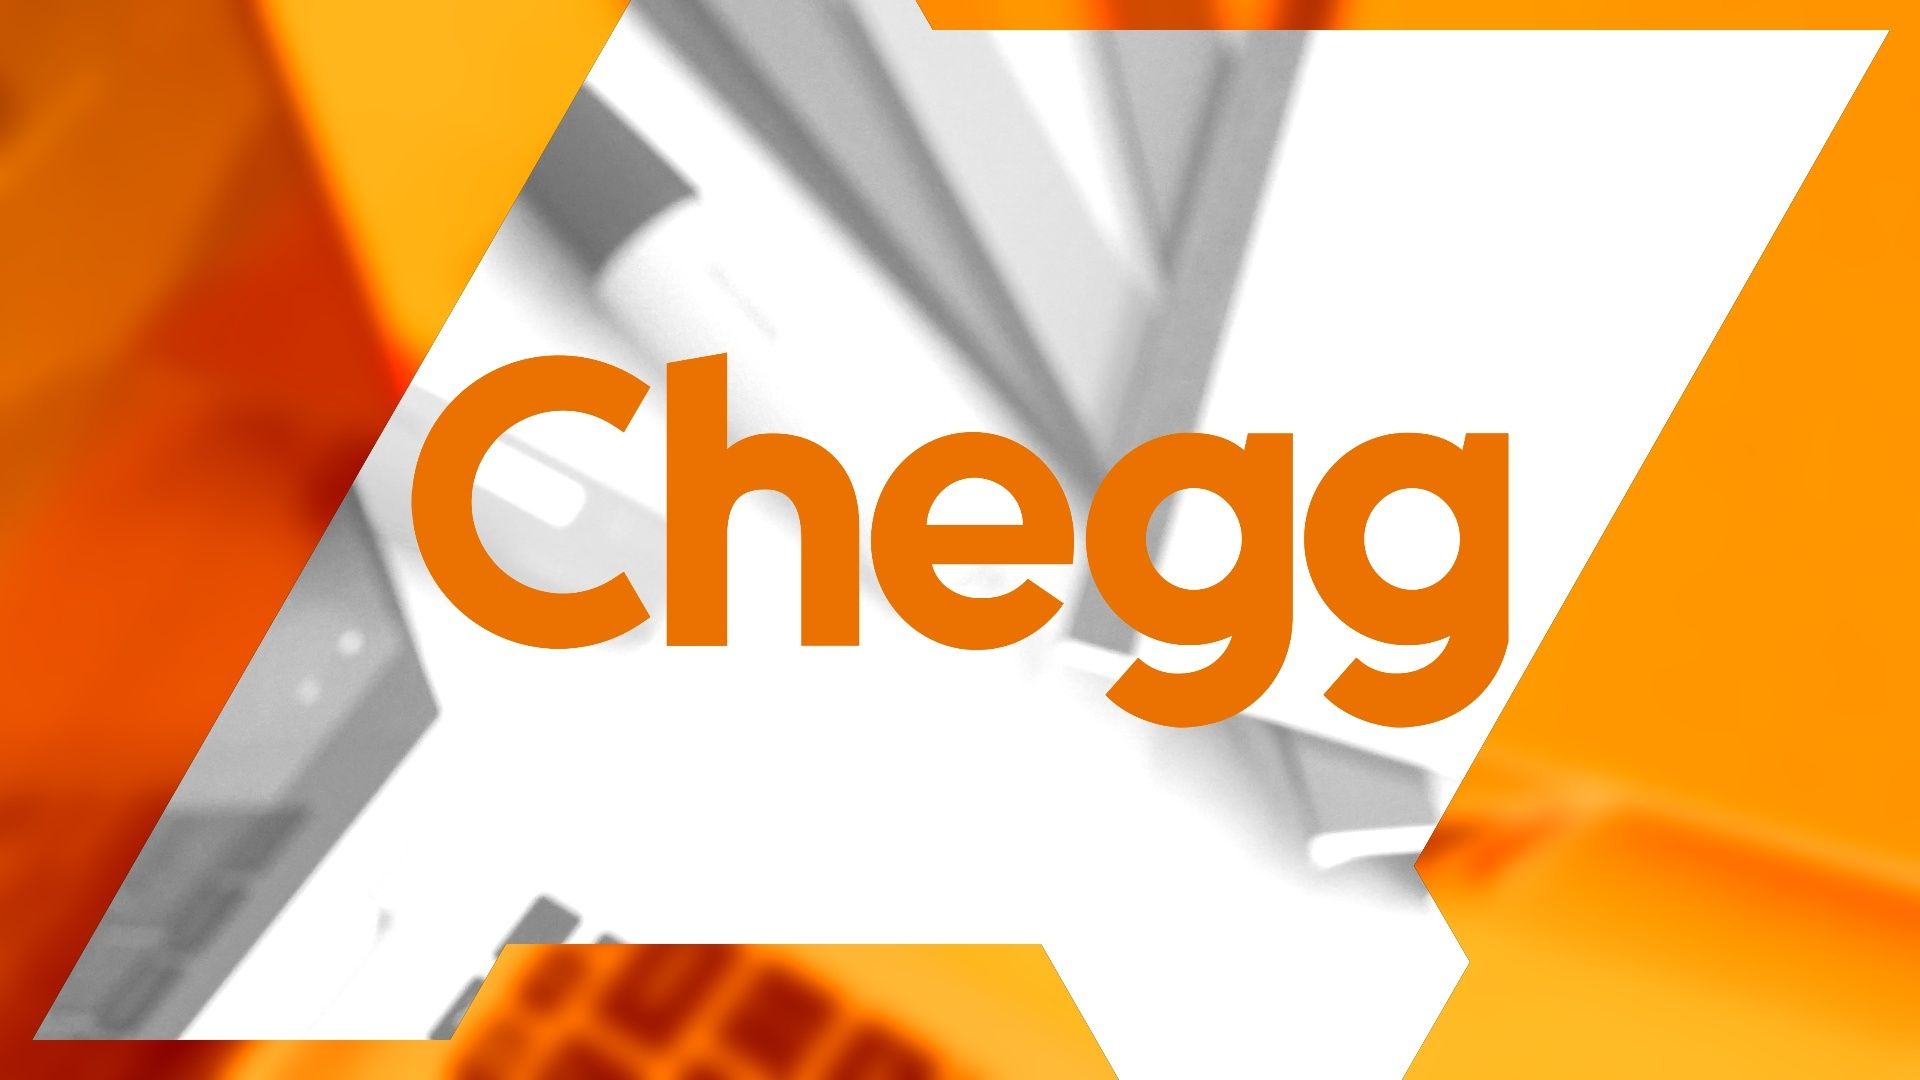 The Chegg logo on a white and orange background.